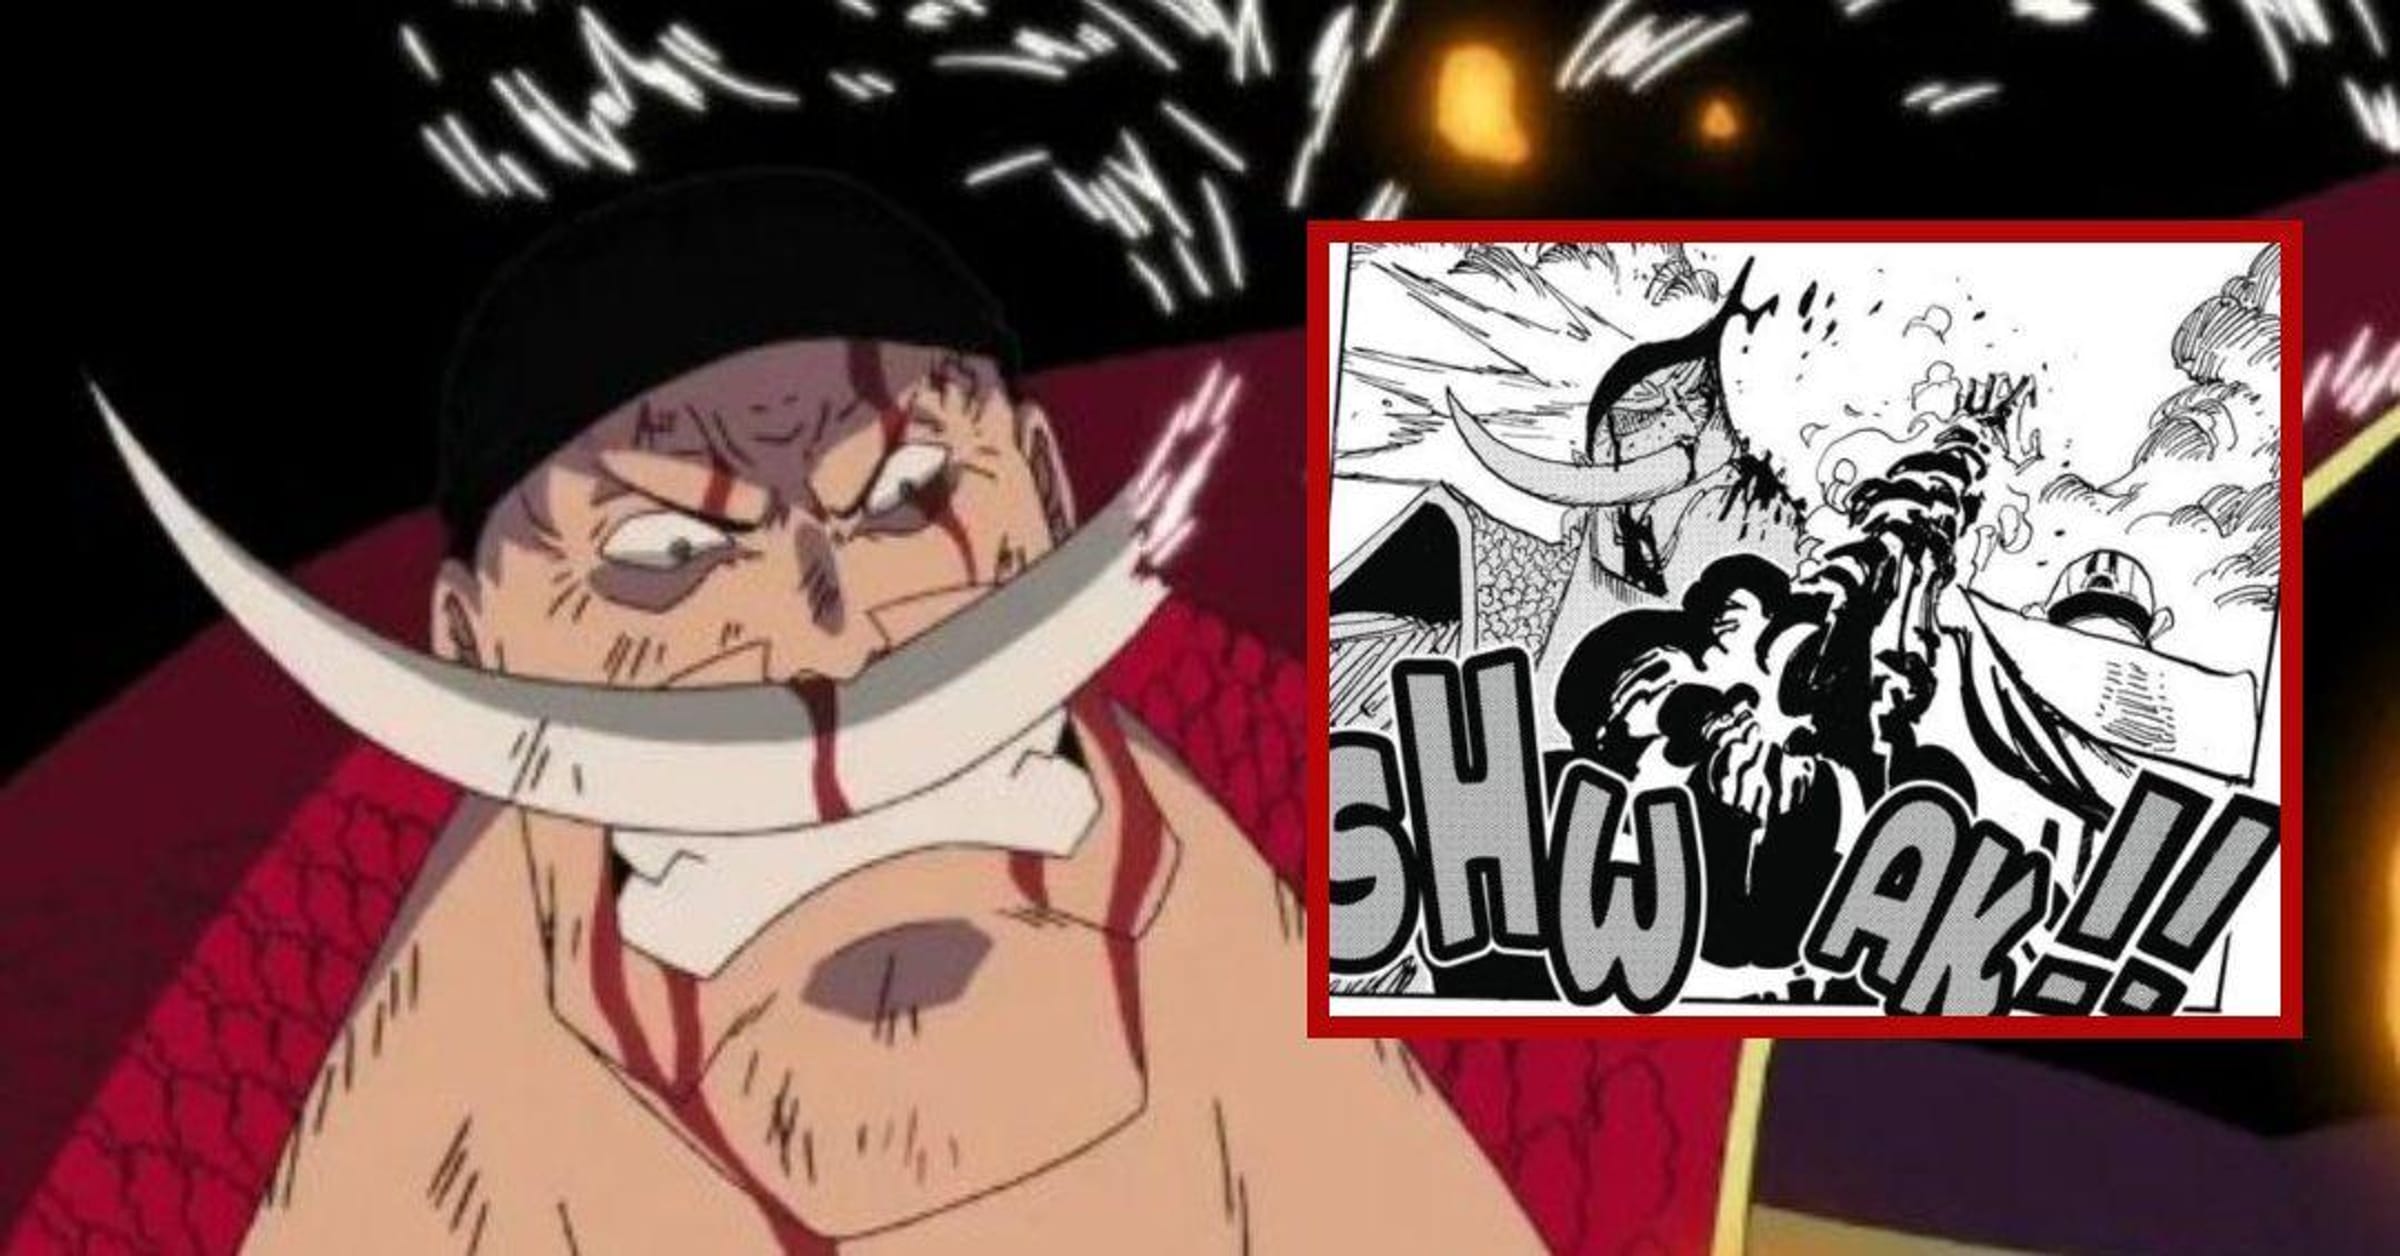 Top 10 One Piece Moments Way More Brutal in the Manga